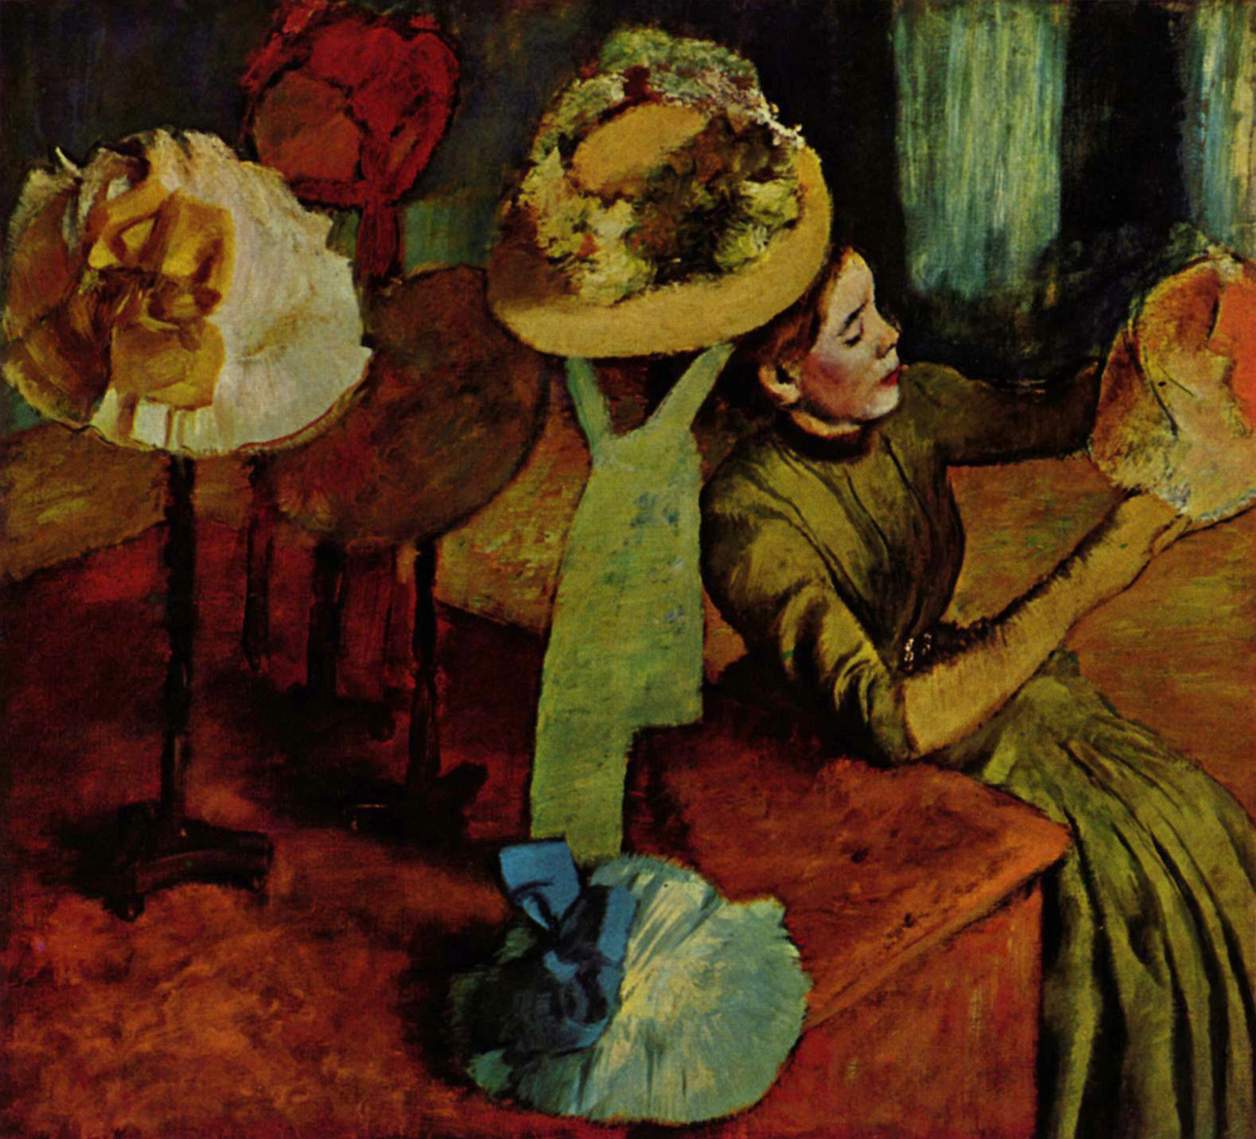 The Millinery Shop by Edgar Degas - 1885 - 99 × 109 cm Art Institute of Chicago